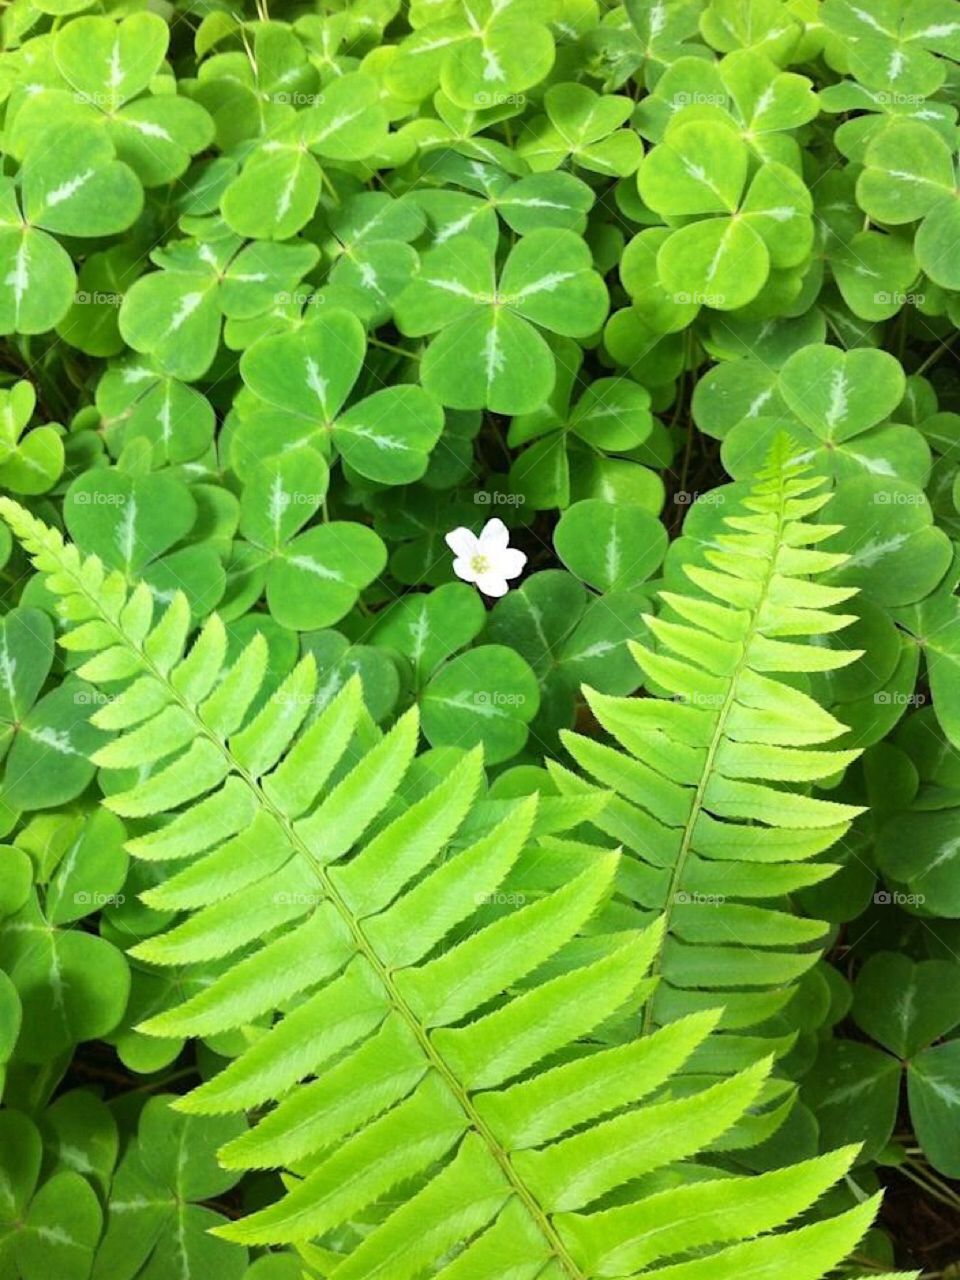 Can you find a 4 leaf Clover? At Butchart Gardens on Victoria Island, BC. Canada 🇨🇦 